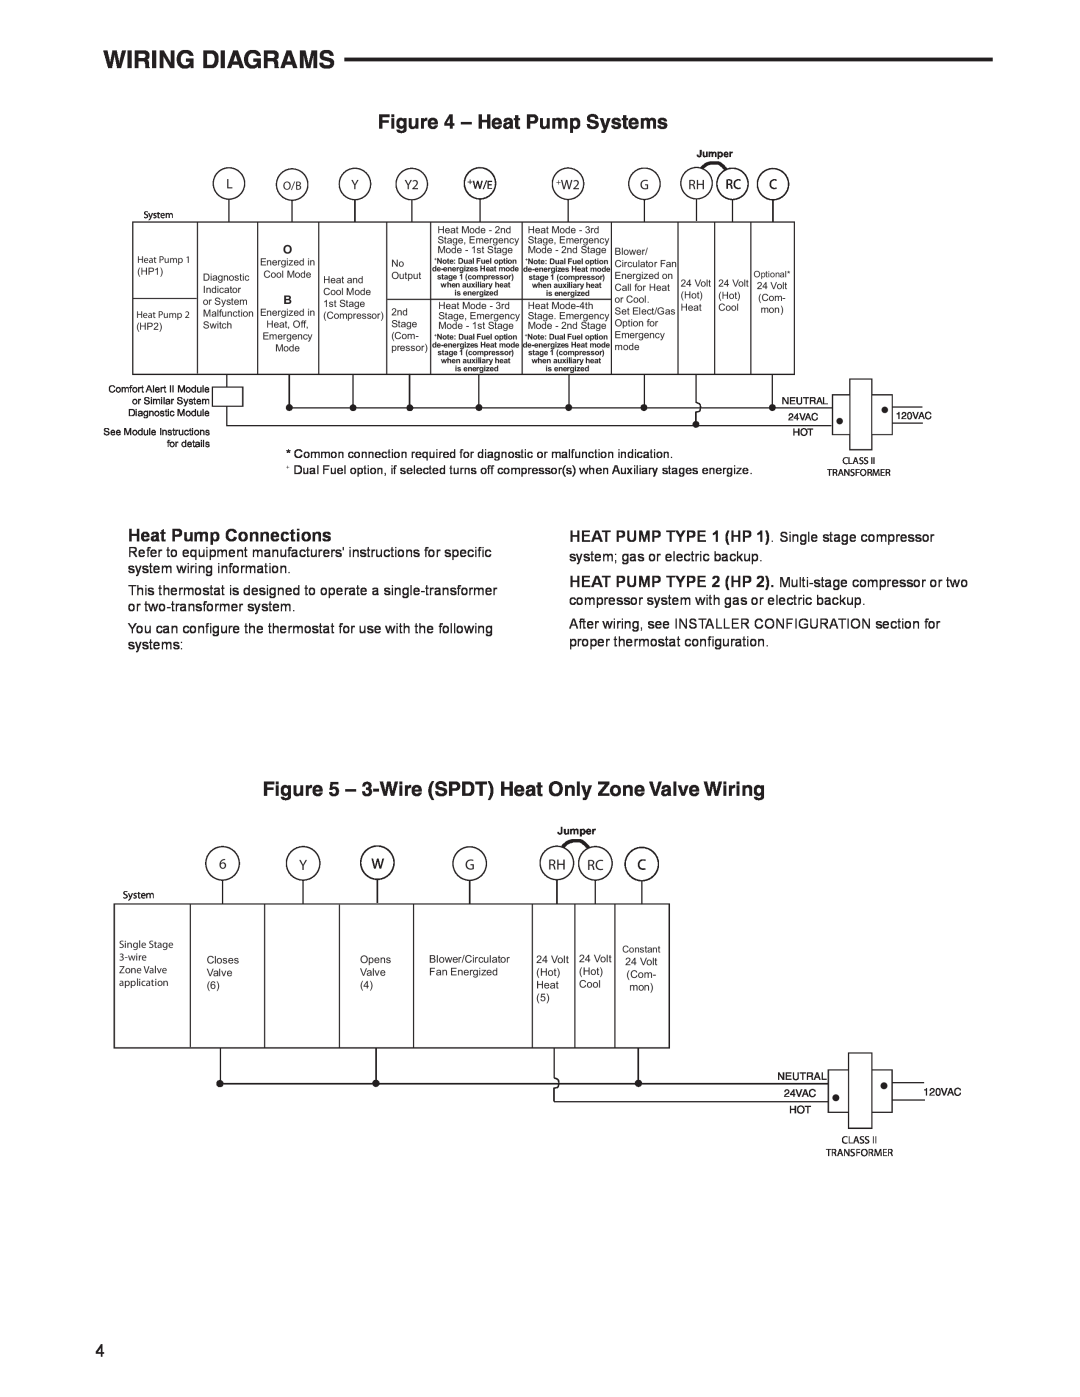 White Rodgers 1F95-0671 Heat Pump Systems, 3-WireSPDT Heat Only Zone Valve Wiring, Heat Pump Connections, Wiring Diagrams 